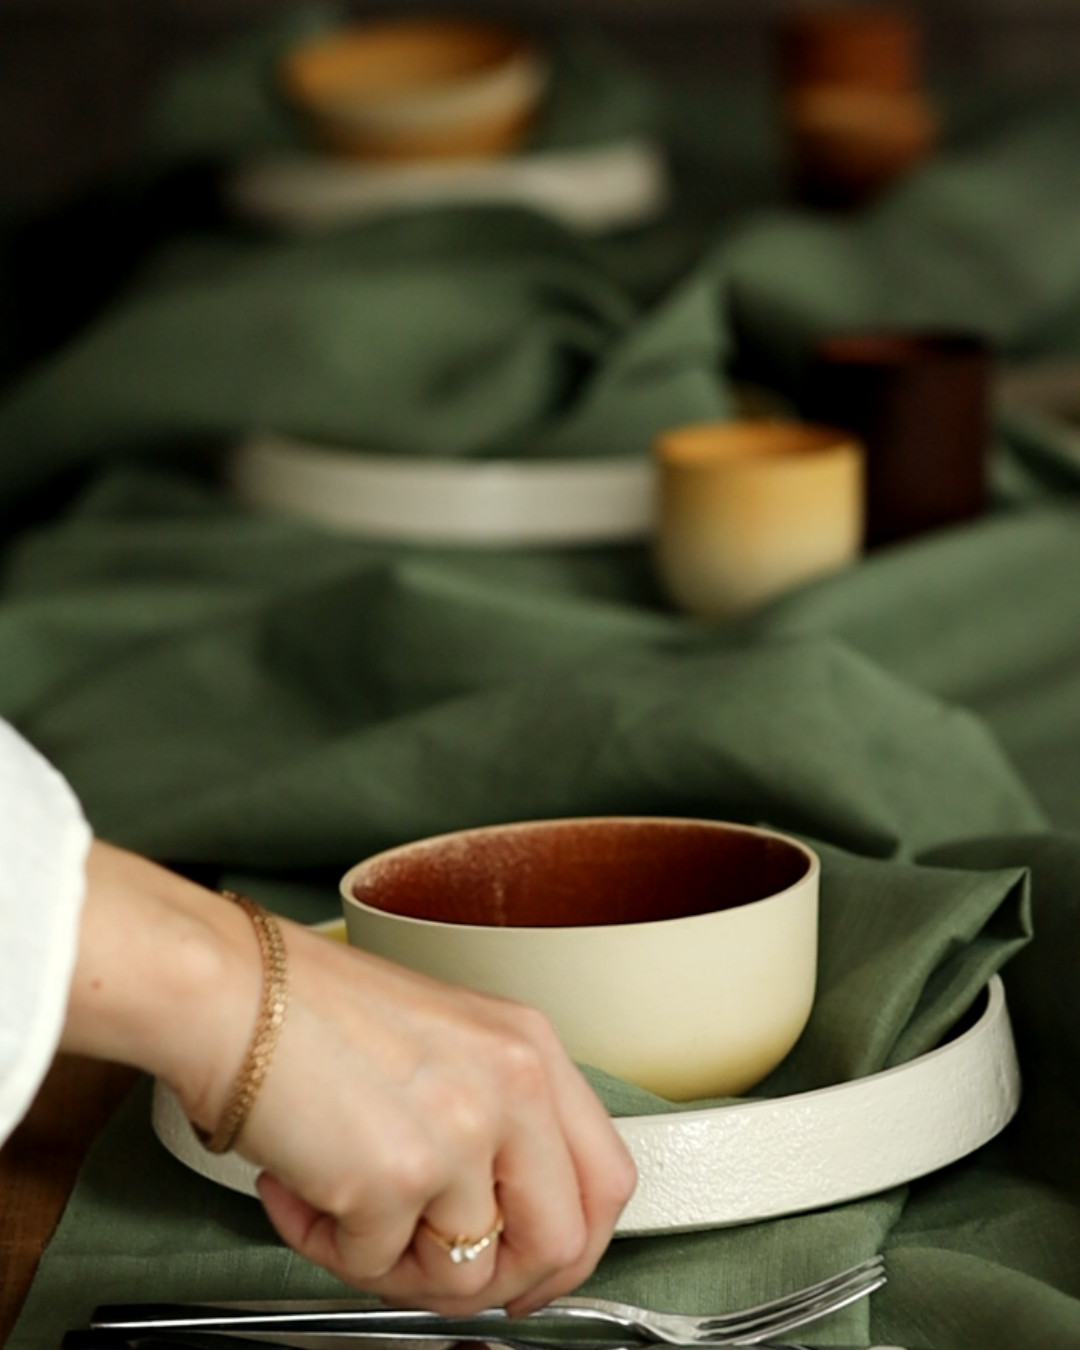 Tablecloth from olive linen